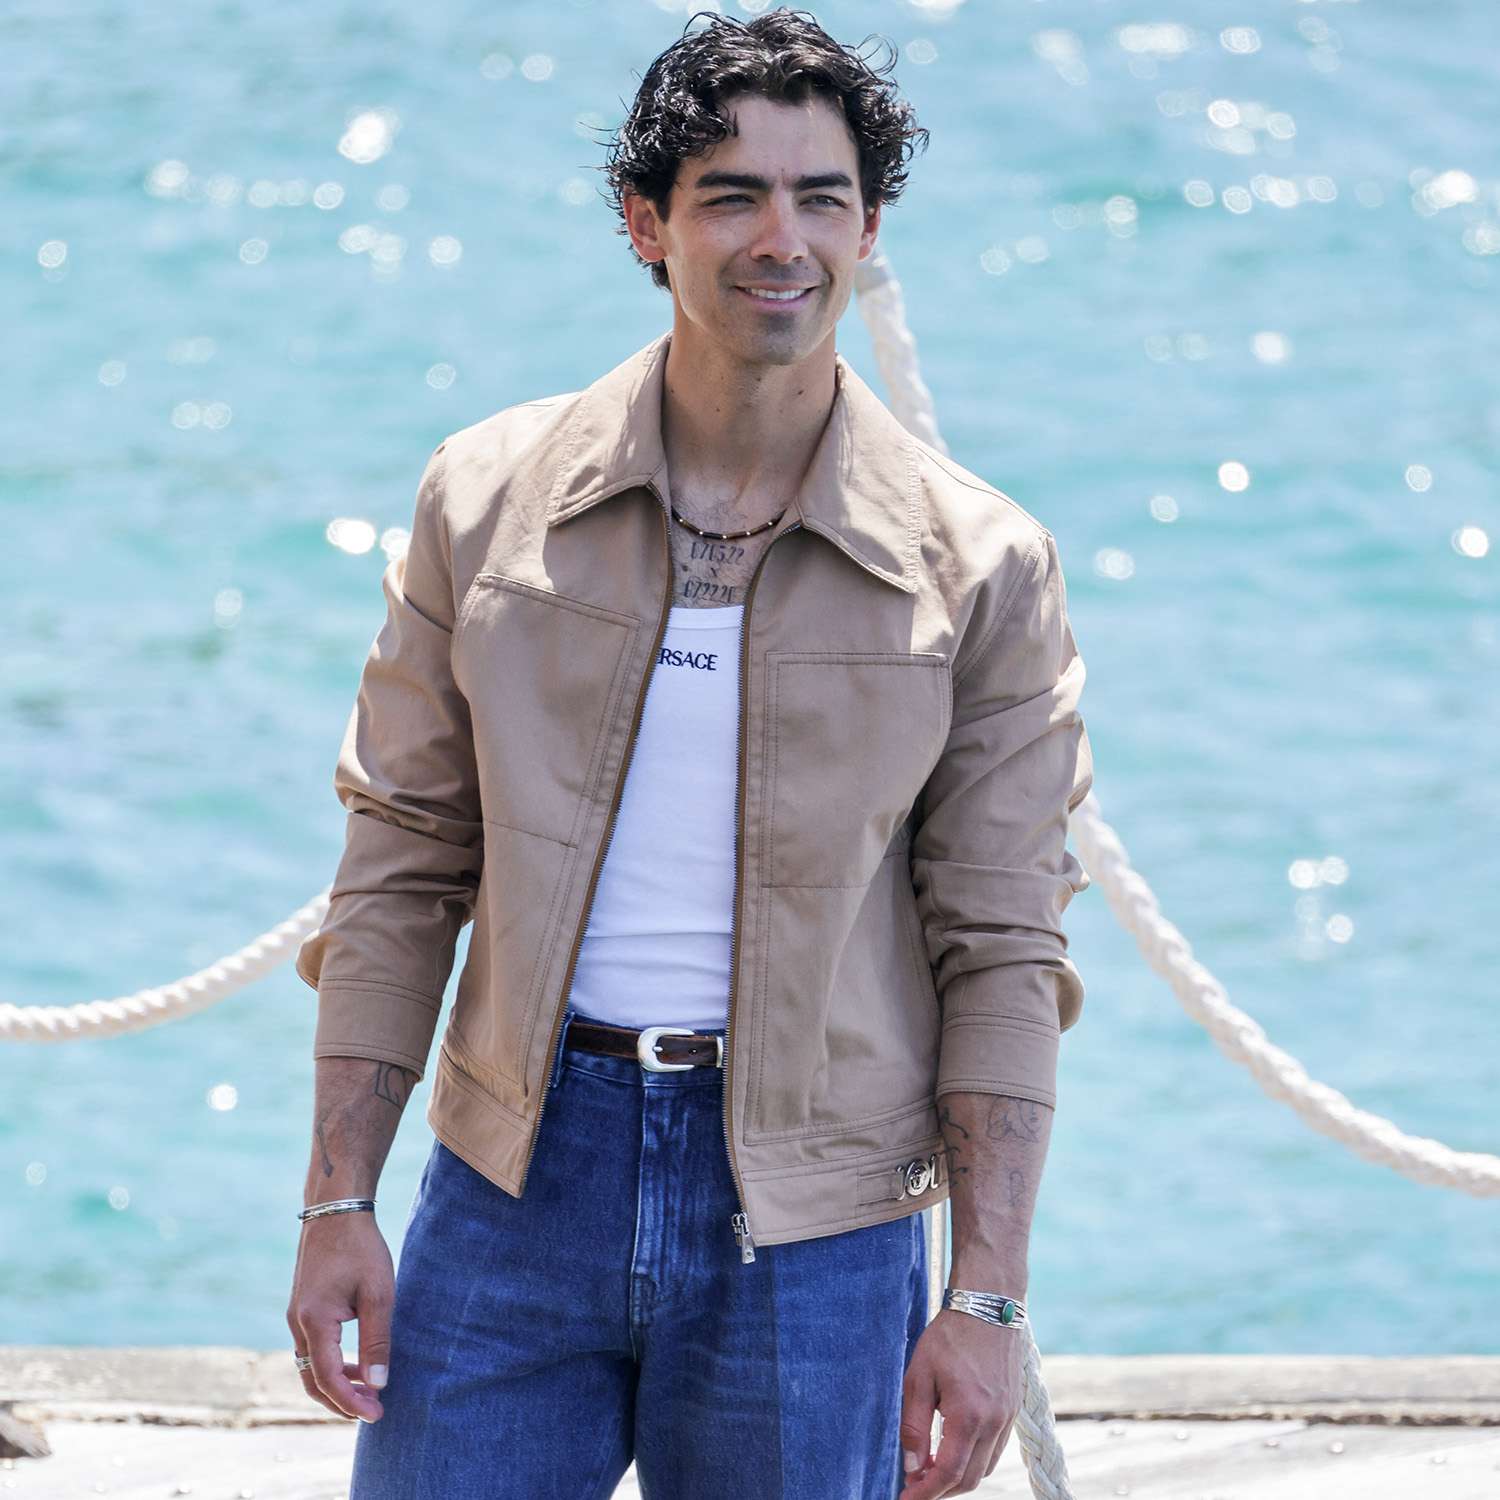 Joe Jonas at the Eden Roc hotel in Antibes, France during the 77th annual Cannes film festival.